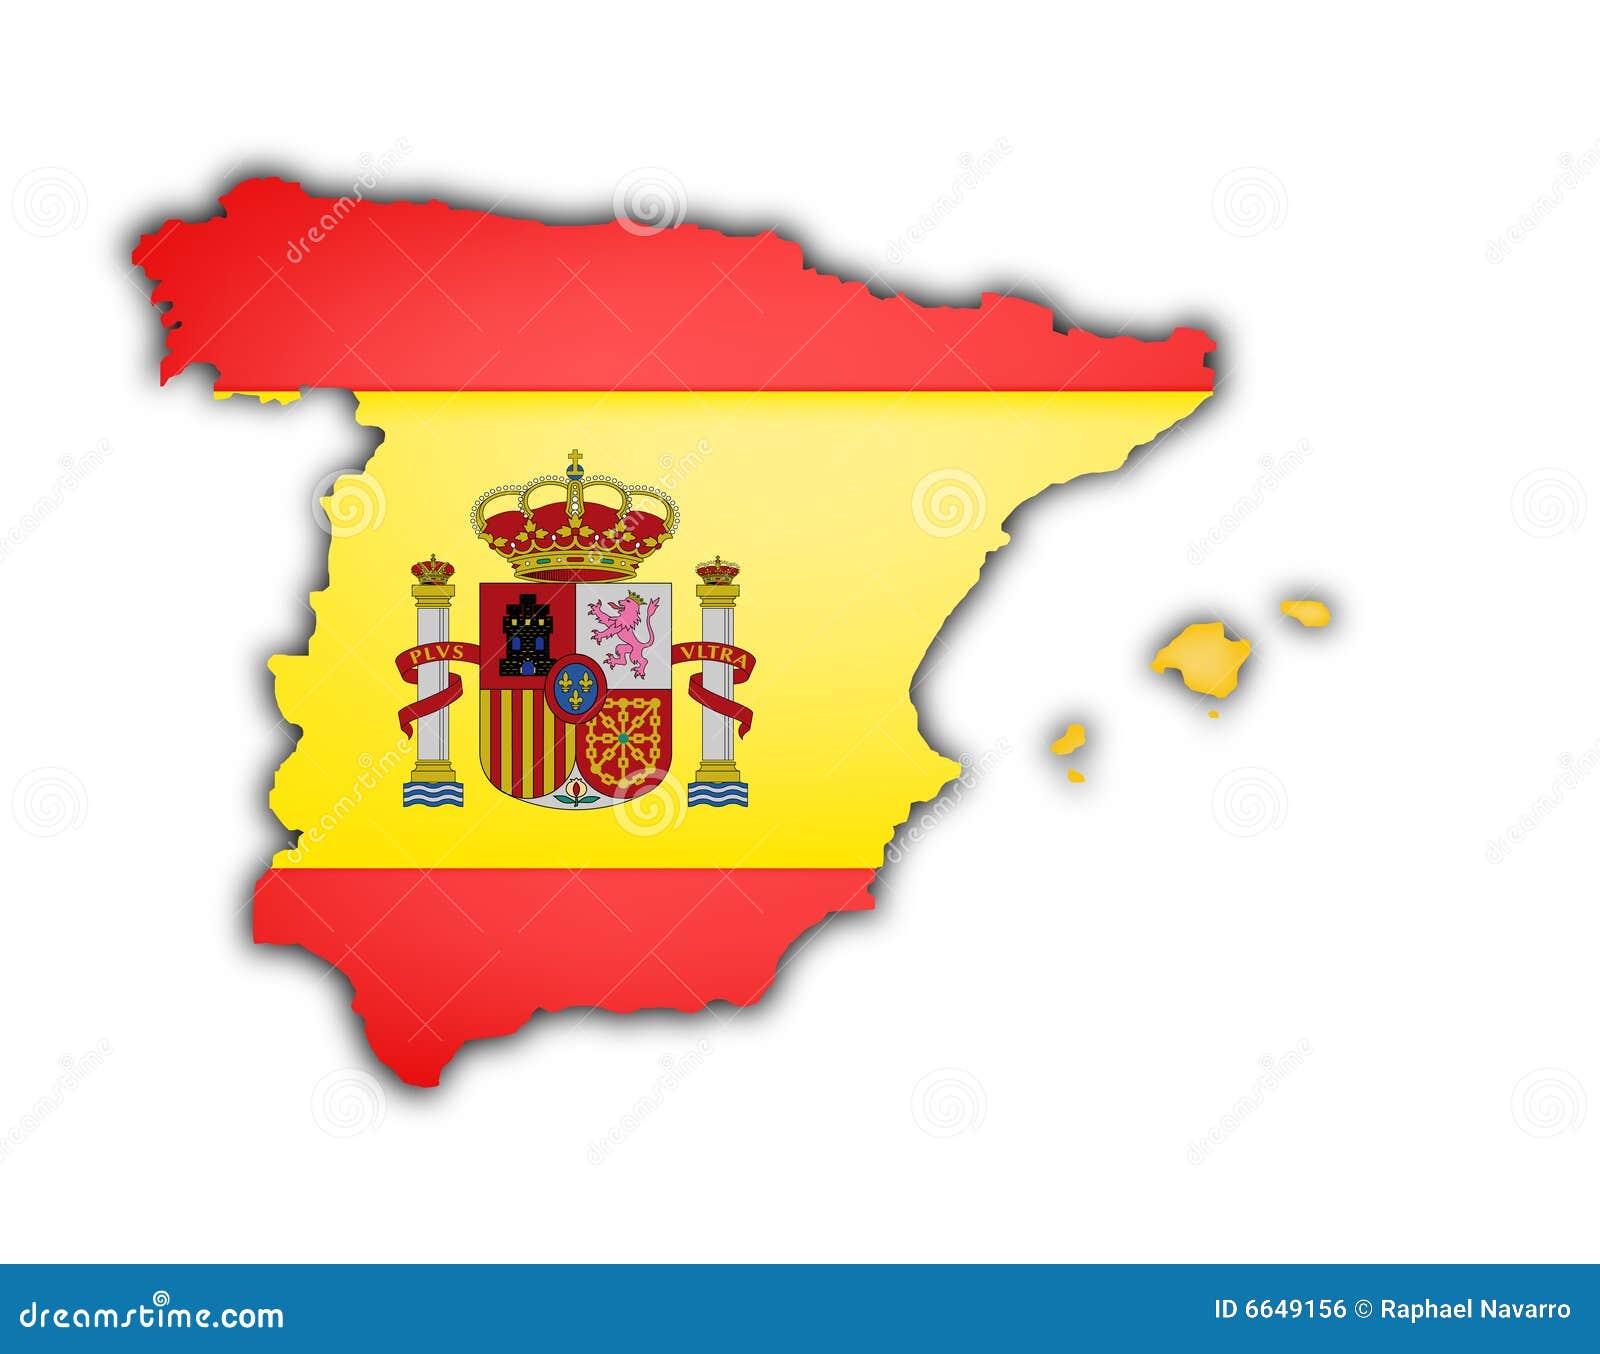 clipart map of spain - photo #27